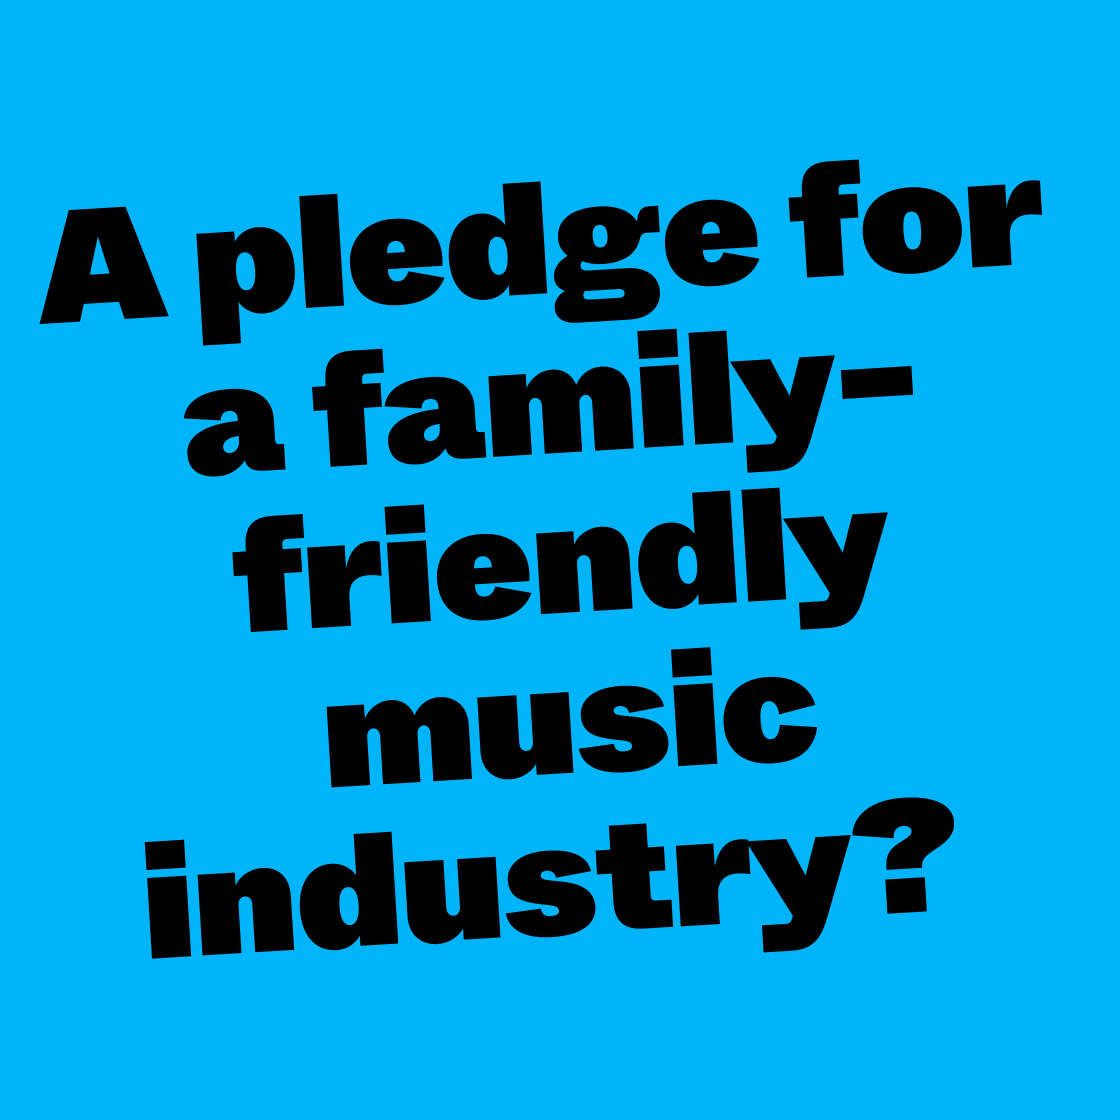 A pledge for a family-friendly music industry